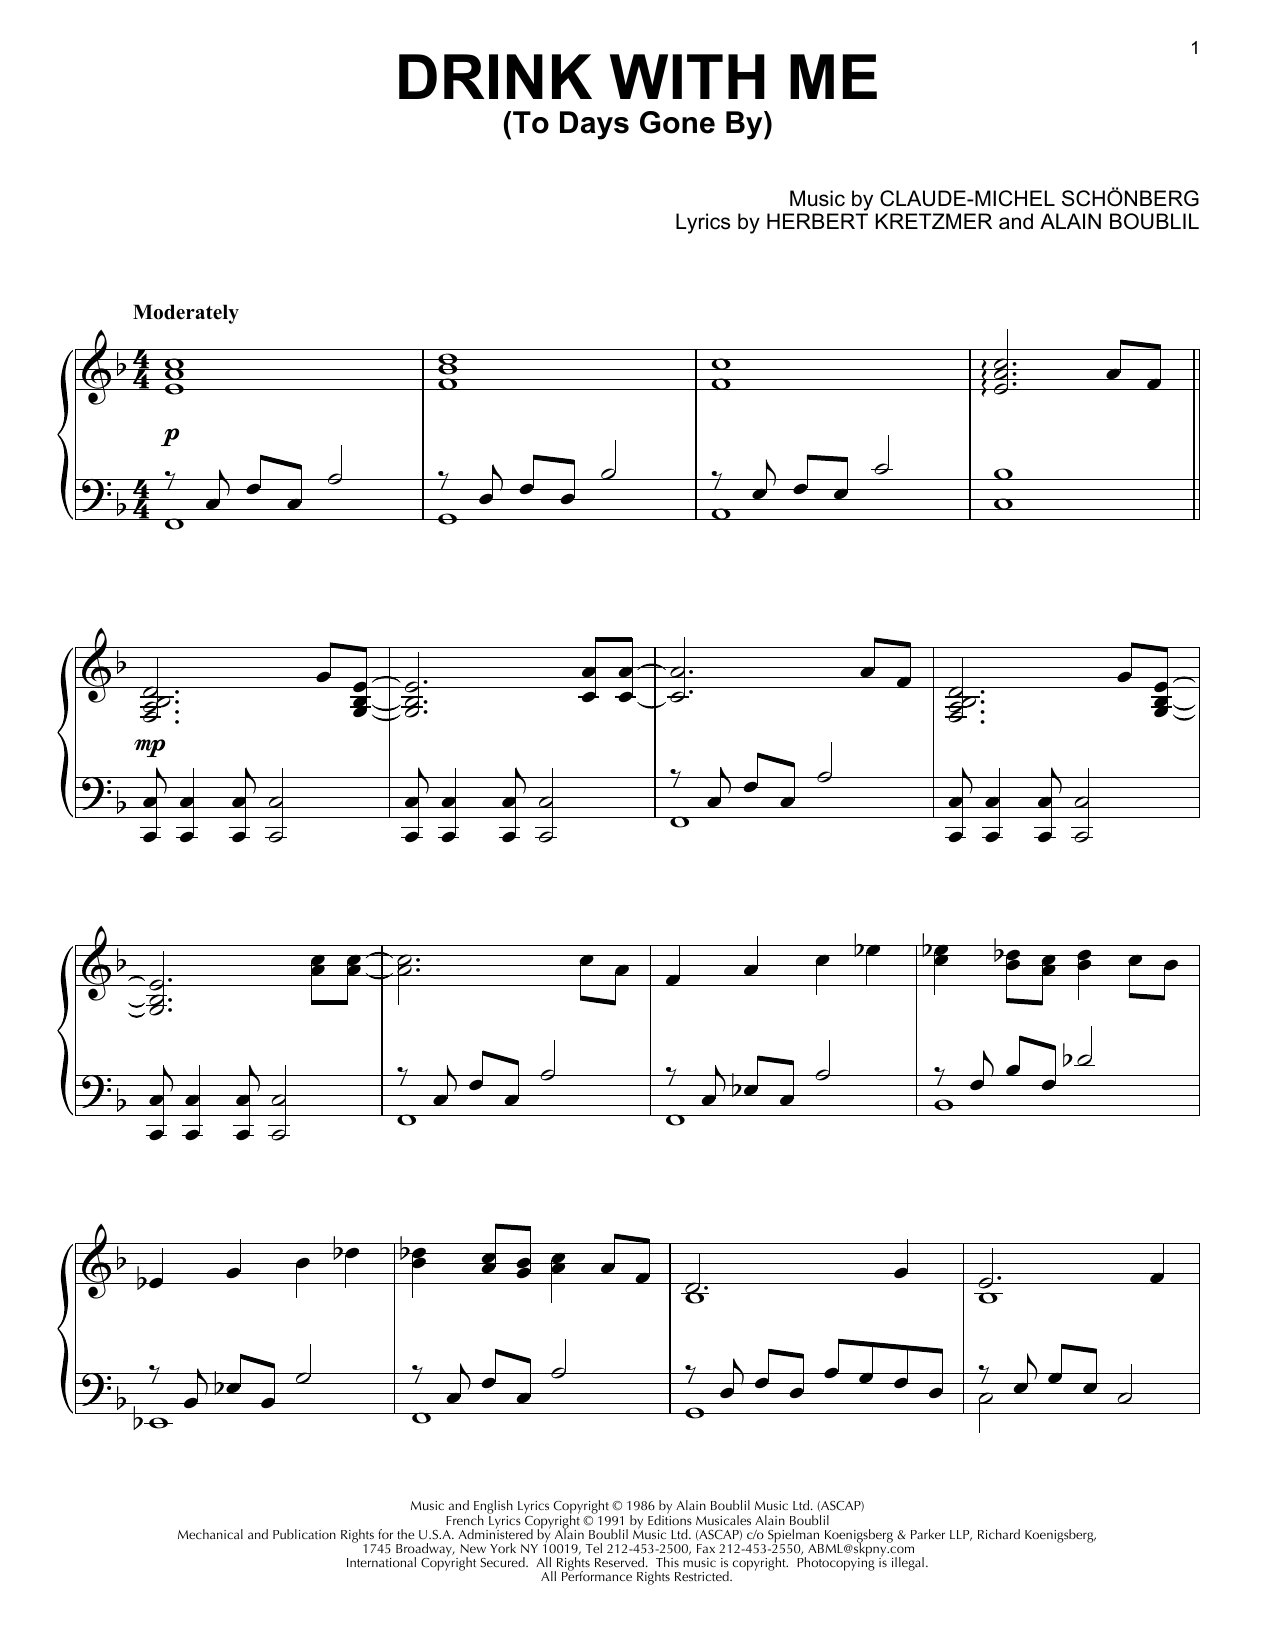 Download Les Miserables (Musical) Drink With Me (To Days Gone By) Sheet Music